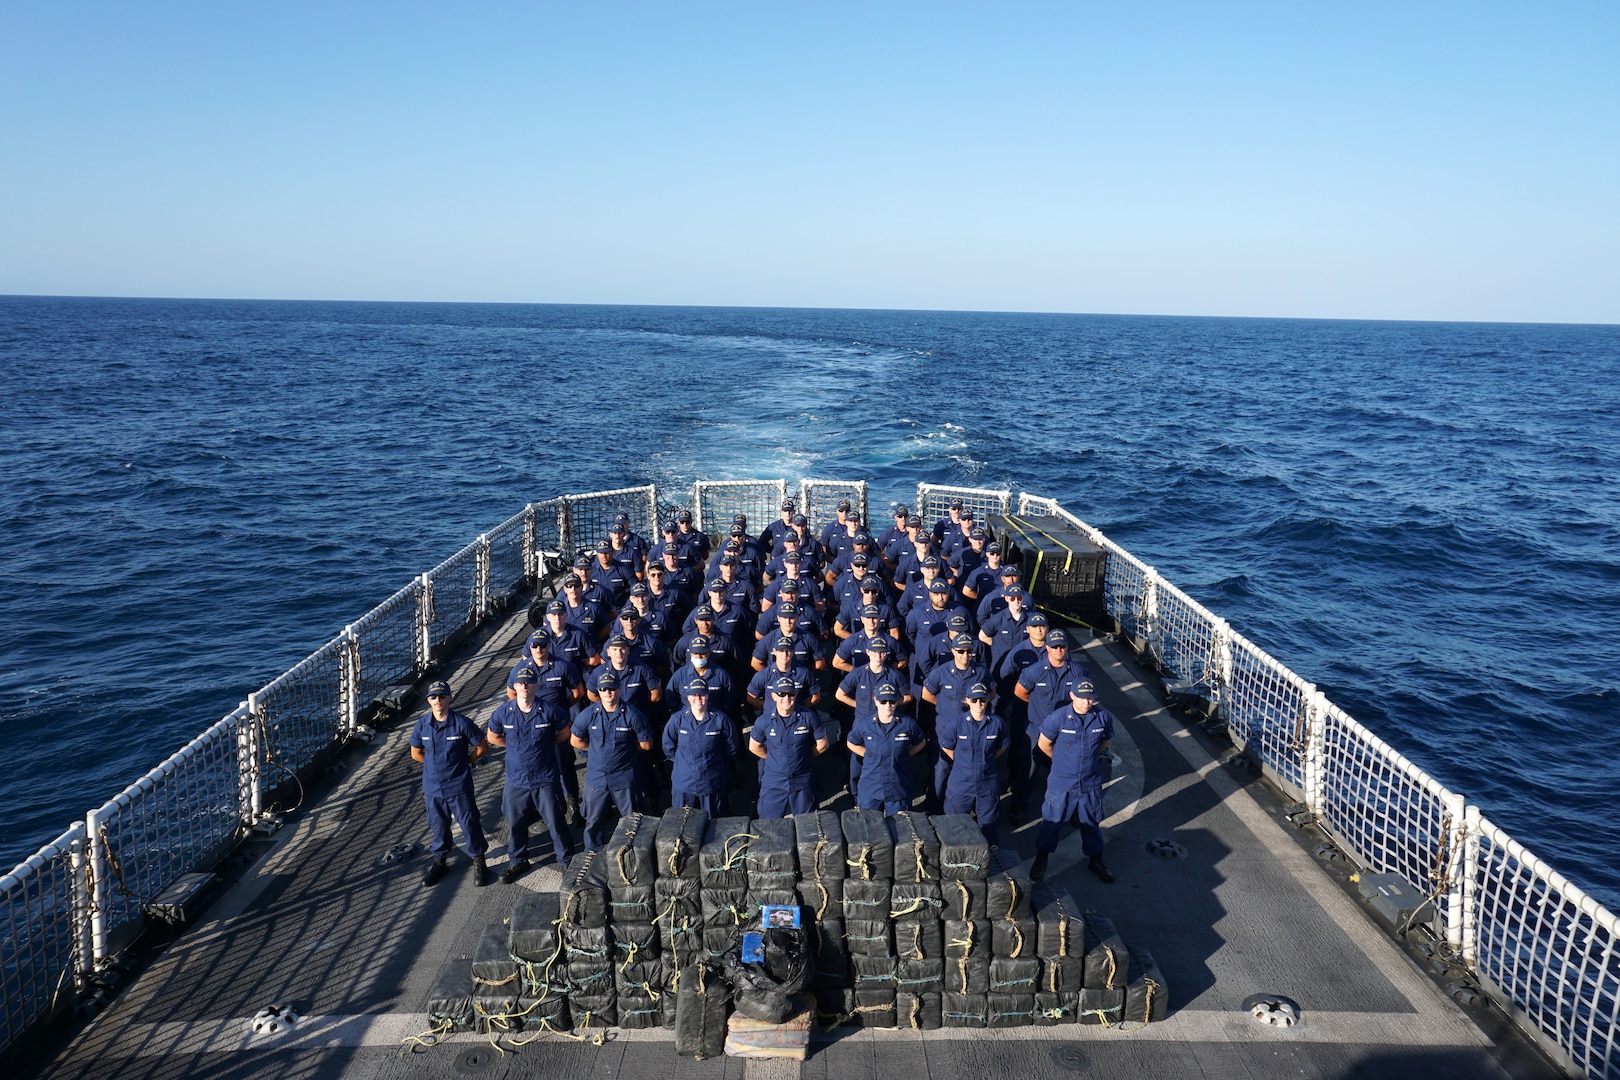 U.S. Coast Guard Cutter Steadfast’s (WMEC 623) crew stands in formation with 1,500 kilograms of cocaine valued at $37.5 million seized from suspected smugglers while patrolling the Eastern Pacific Ocean, March 4, 2023. Steadfast and crew returned to their Astoria, Oregon, homeport, March 14, 2023, following a 69-day counternarcotics patrol in the Eastern Pacific Ocean. U.S Coast Guard photo by Lt. j.g. Geoffrey DeLorie.